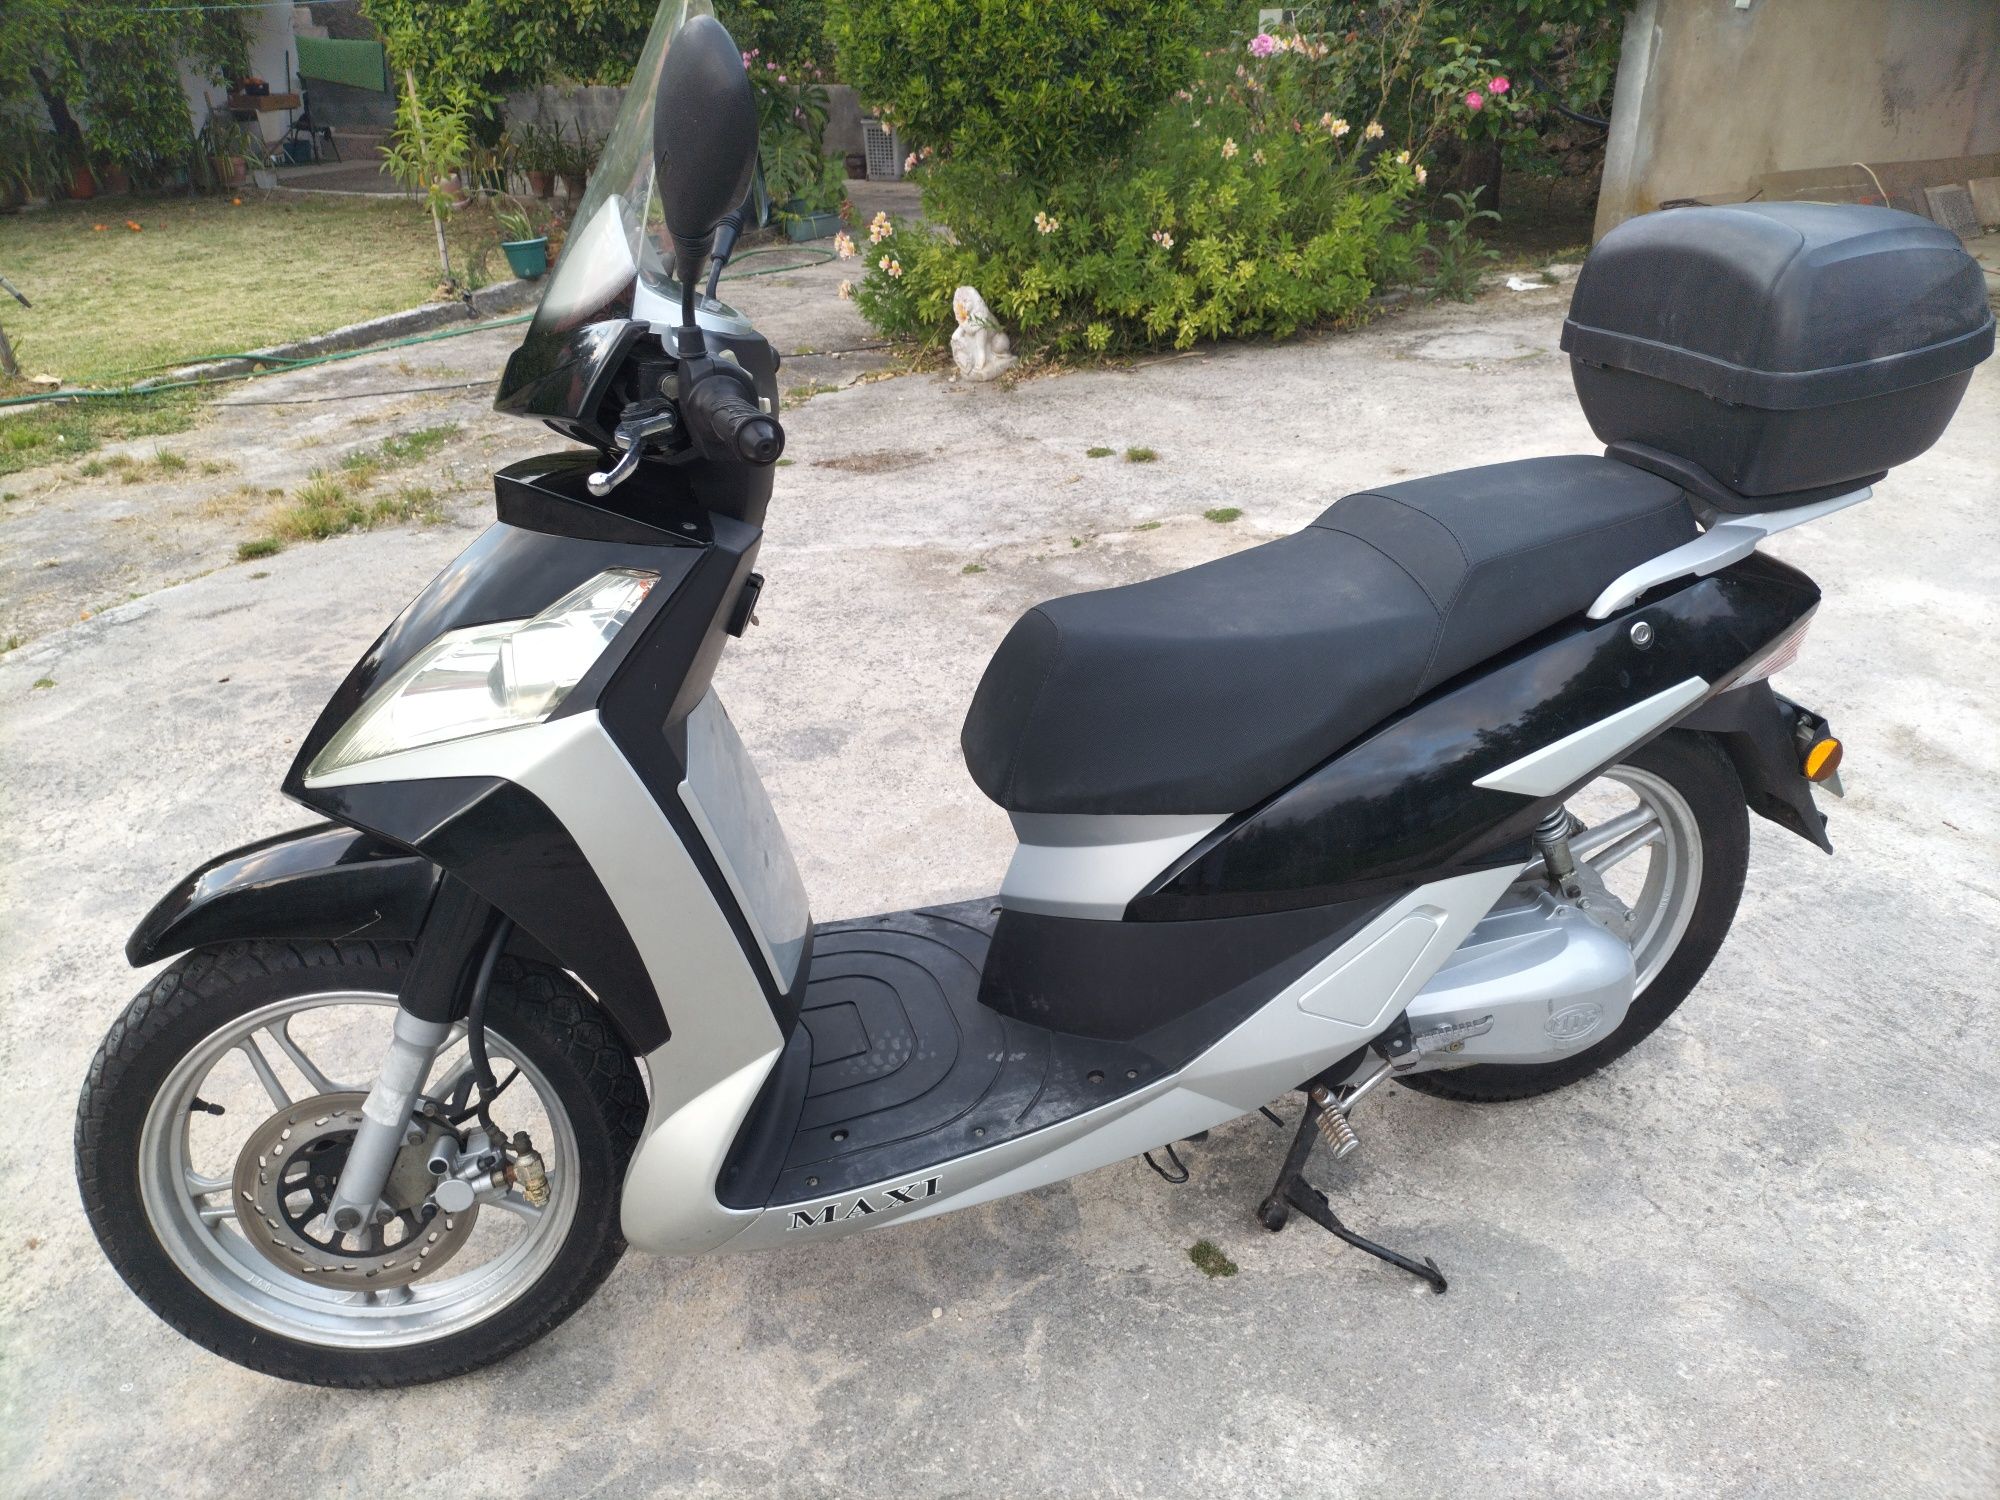 Scooter MTR maxi 125